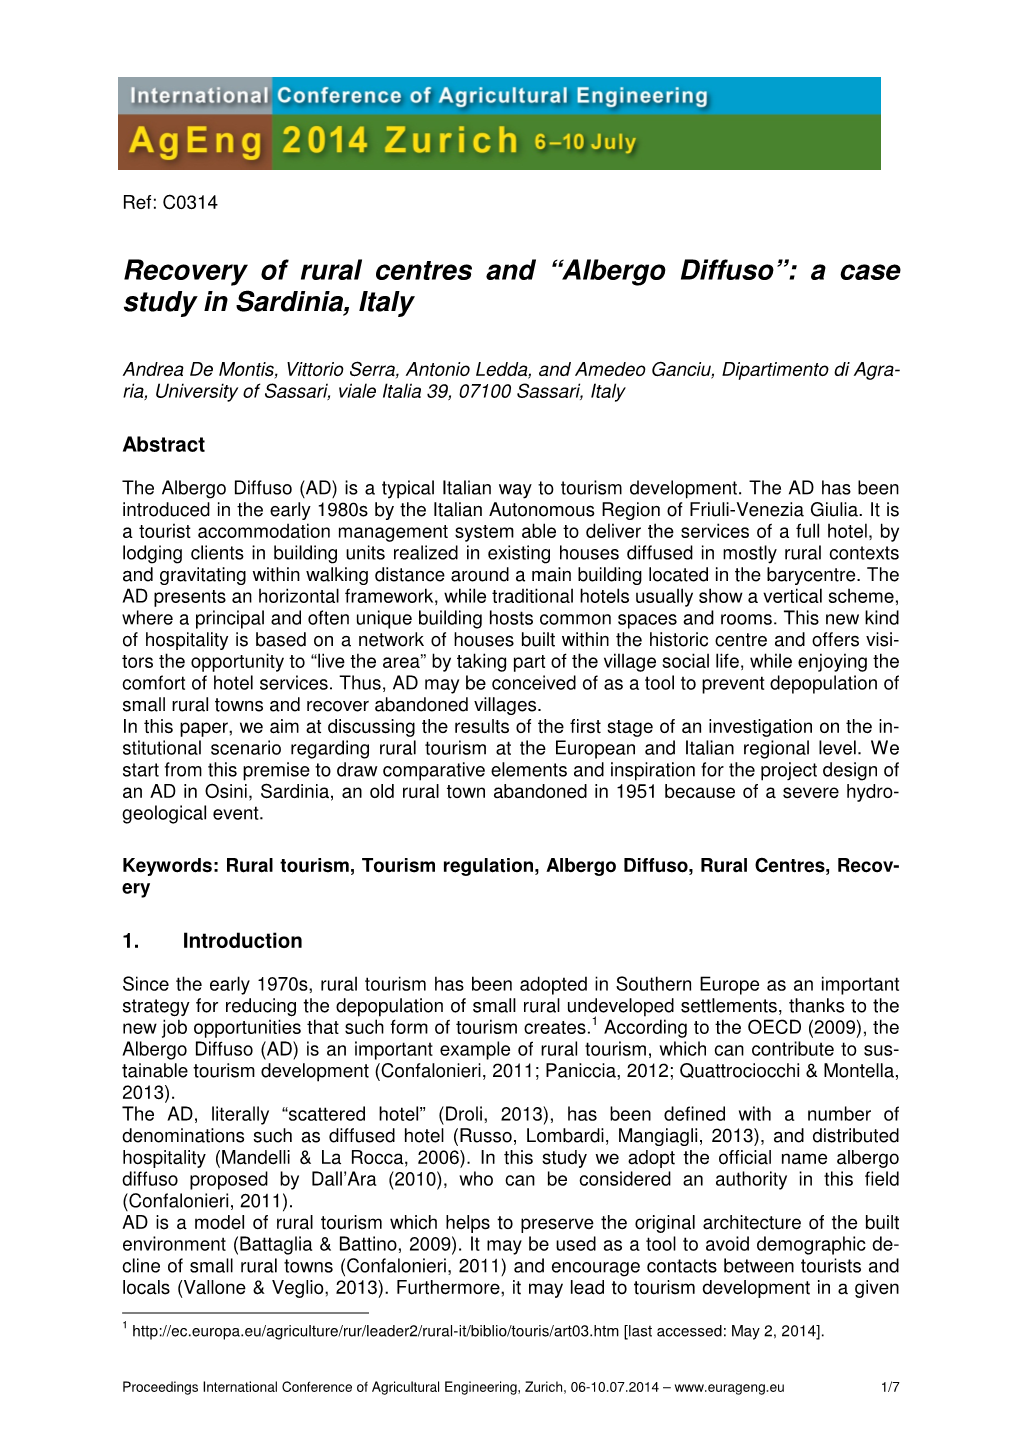 Recovery of Rural Centres and “Albergo Diffuso”: a Case Study in Sardinia, Italy